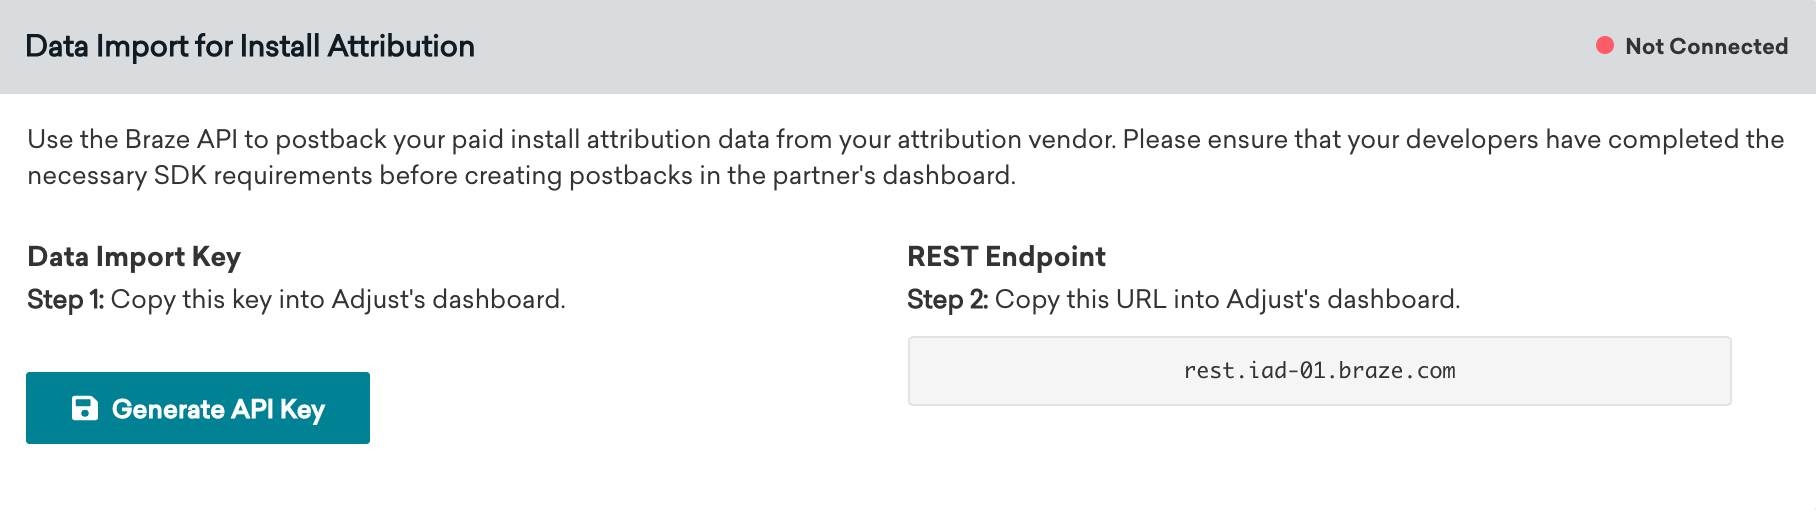 This image shows the "Data Import for Install Attribution" box found in the Adjust technology page. In this box, you are shown the data import key and the REST endpoint.